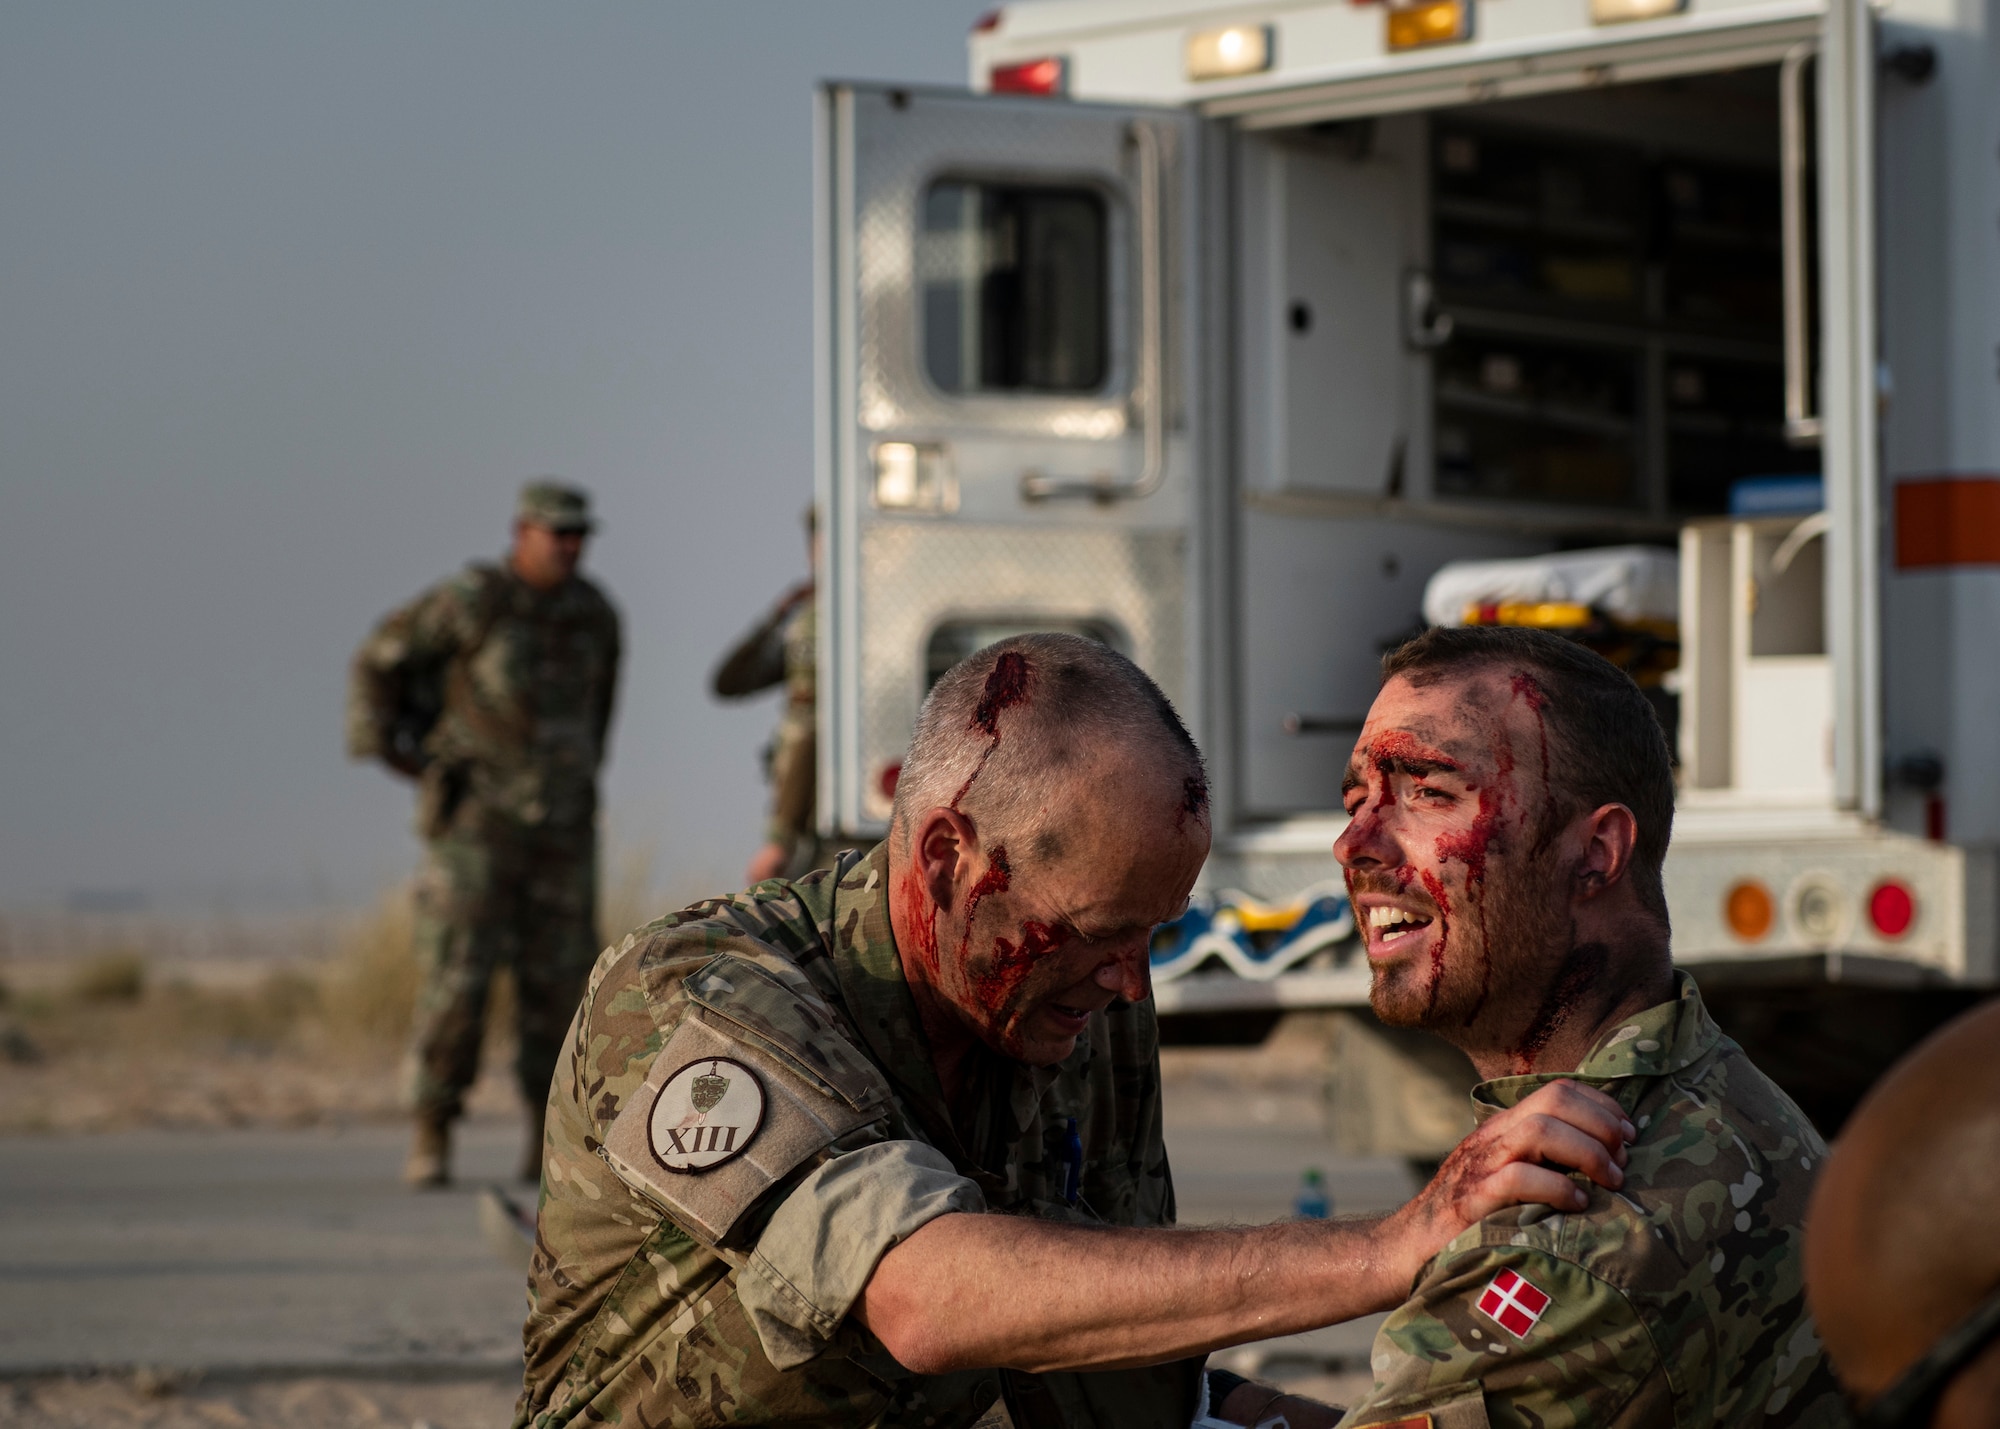 People acting as simulated casualties with injuries during a training exercise.